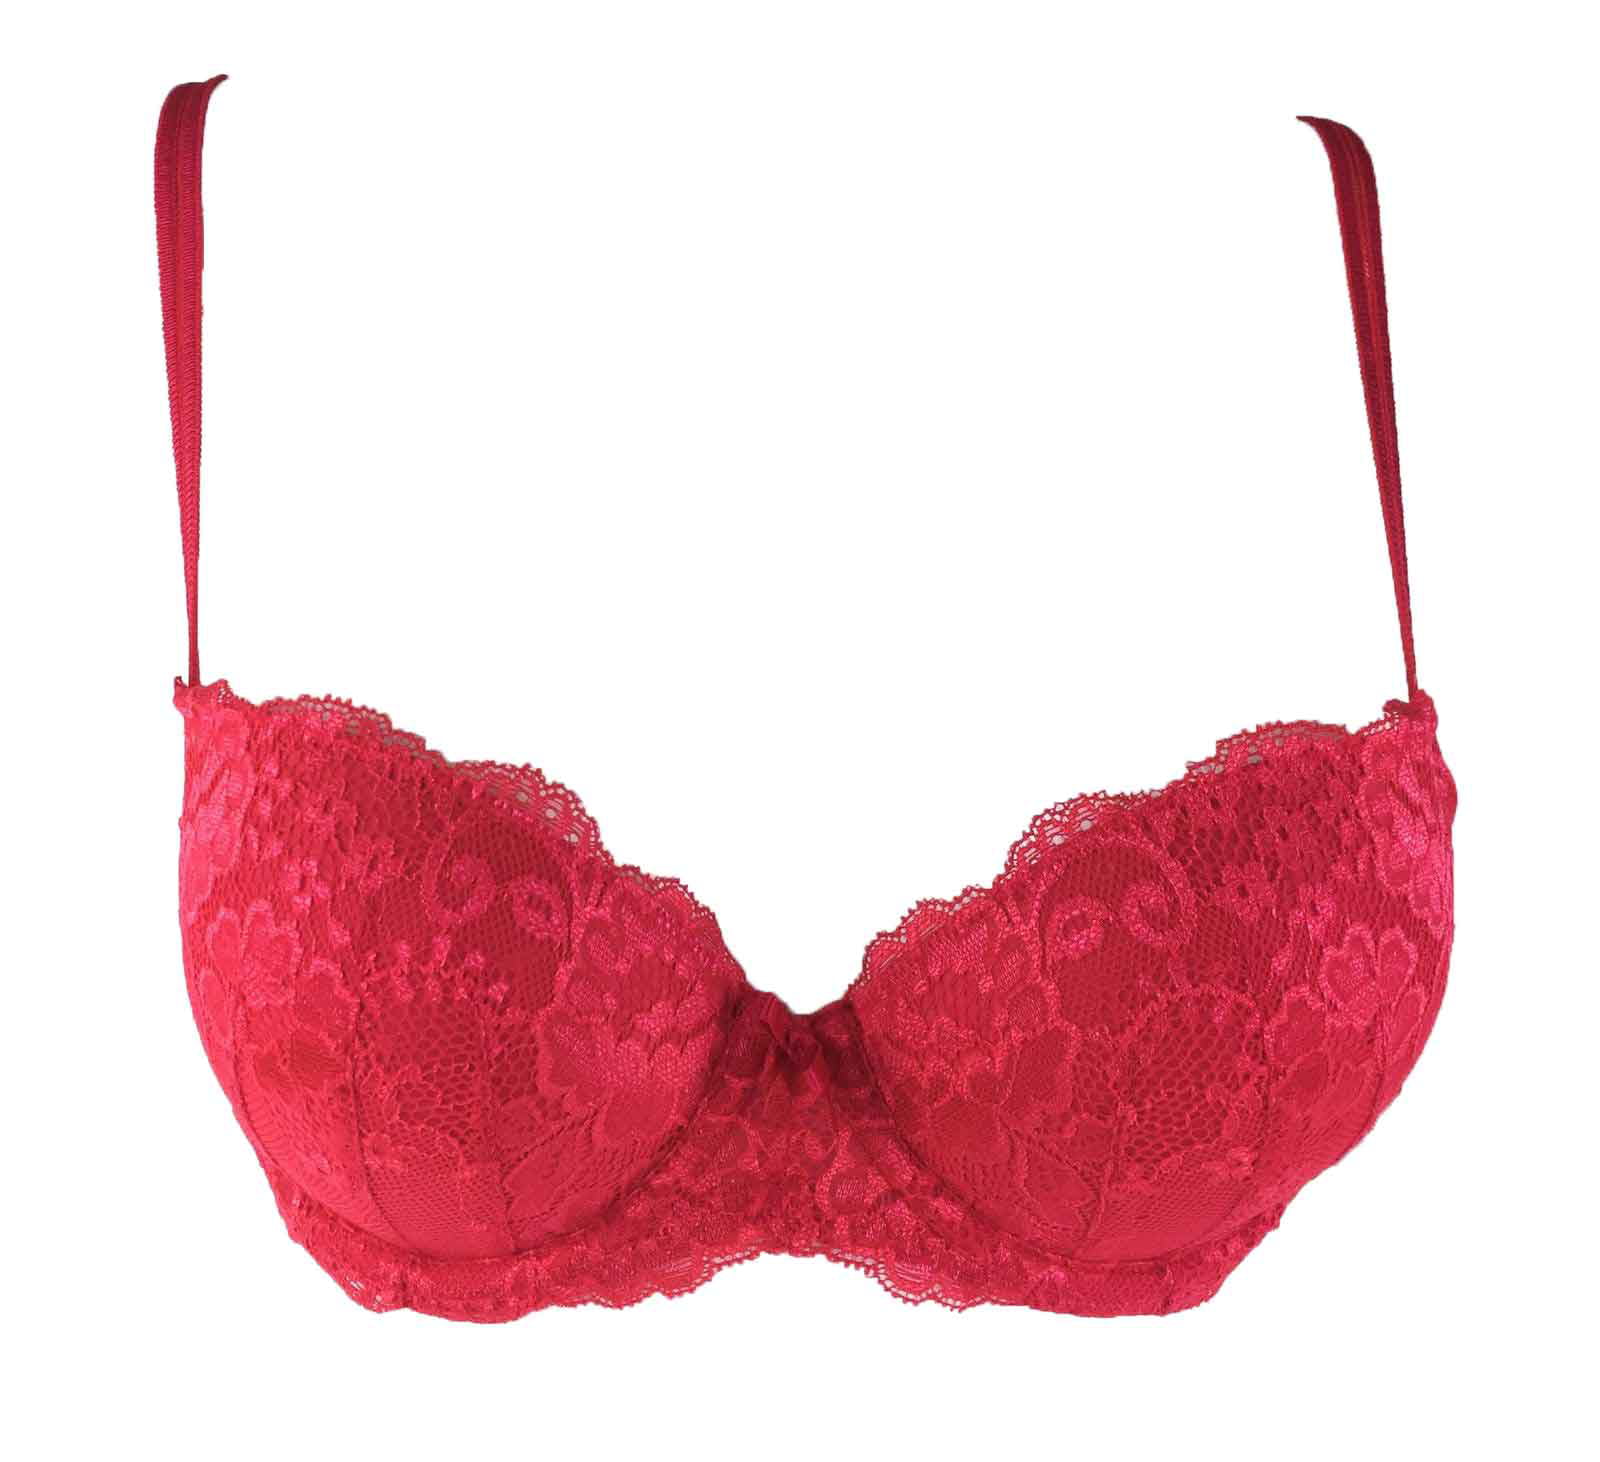 Shyle 40c Red Push Up Bra in Tuni - Dealers, Manufacturers